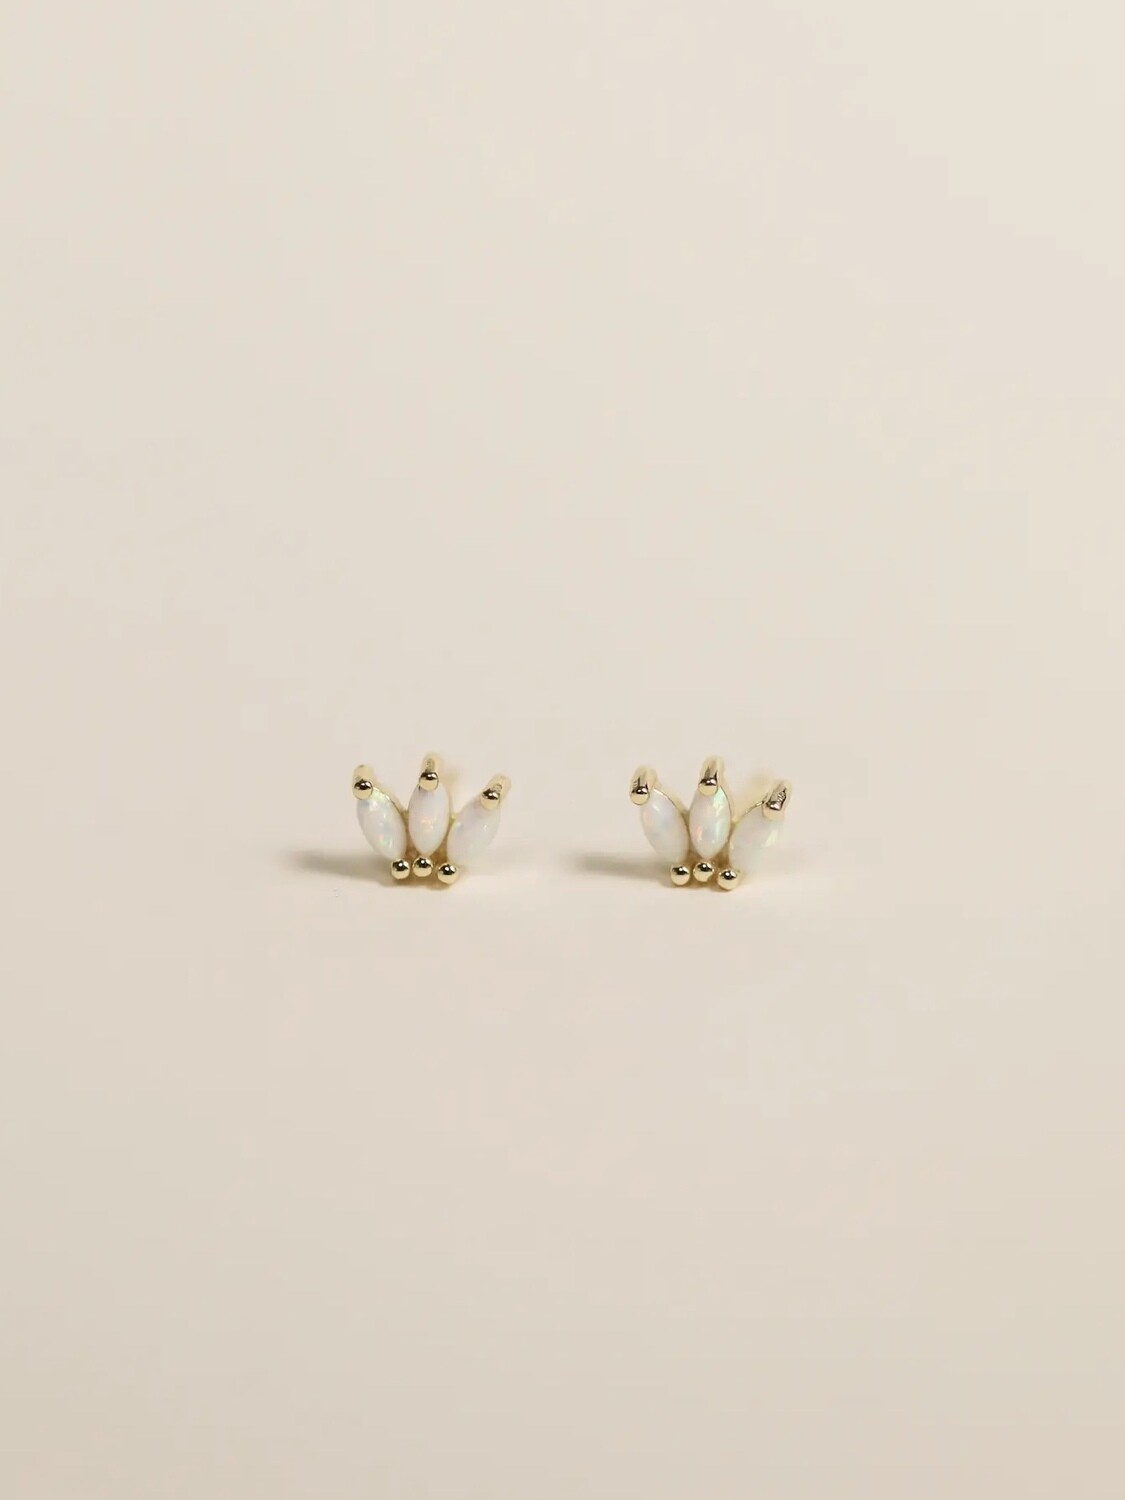 White Opalescent Crown Post Earrings in 14kt Gold Over Sterling Silver - JK95